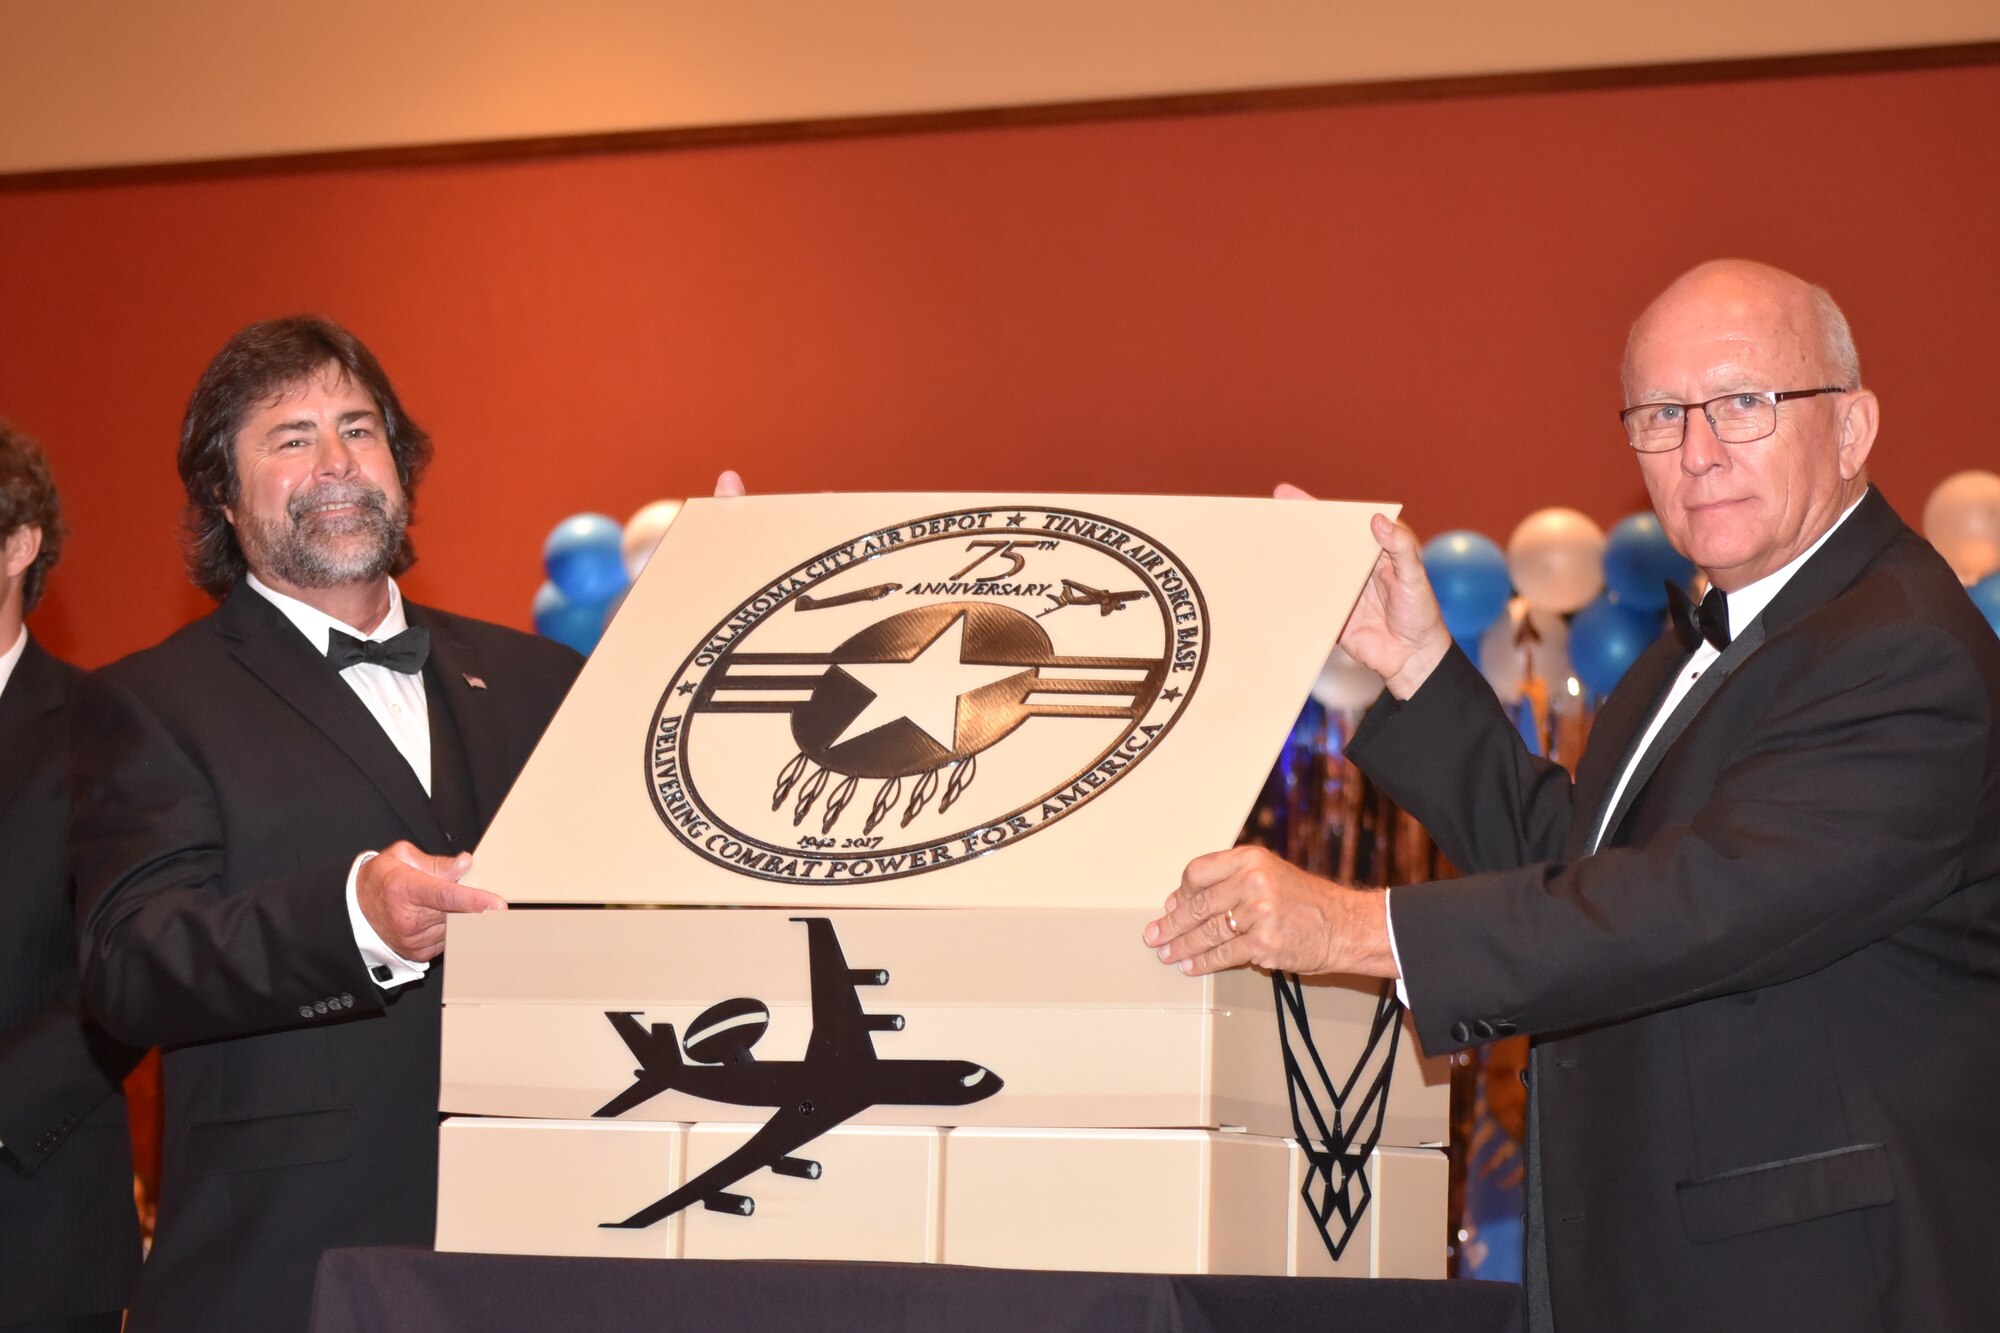 Phil Tinker, grandson of Maj. Gen. Clarence Tinker, and Jim Diehl, president of the Tinker Heritage Foundation, place the lid on top of the 75th anniversary time capsule during the 2017 Air Force Ball, held on Sept. 16 at the Embassy Suites Hotel in Norman, Oklahoma.